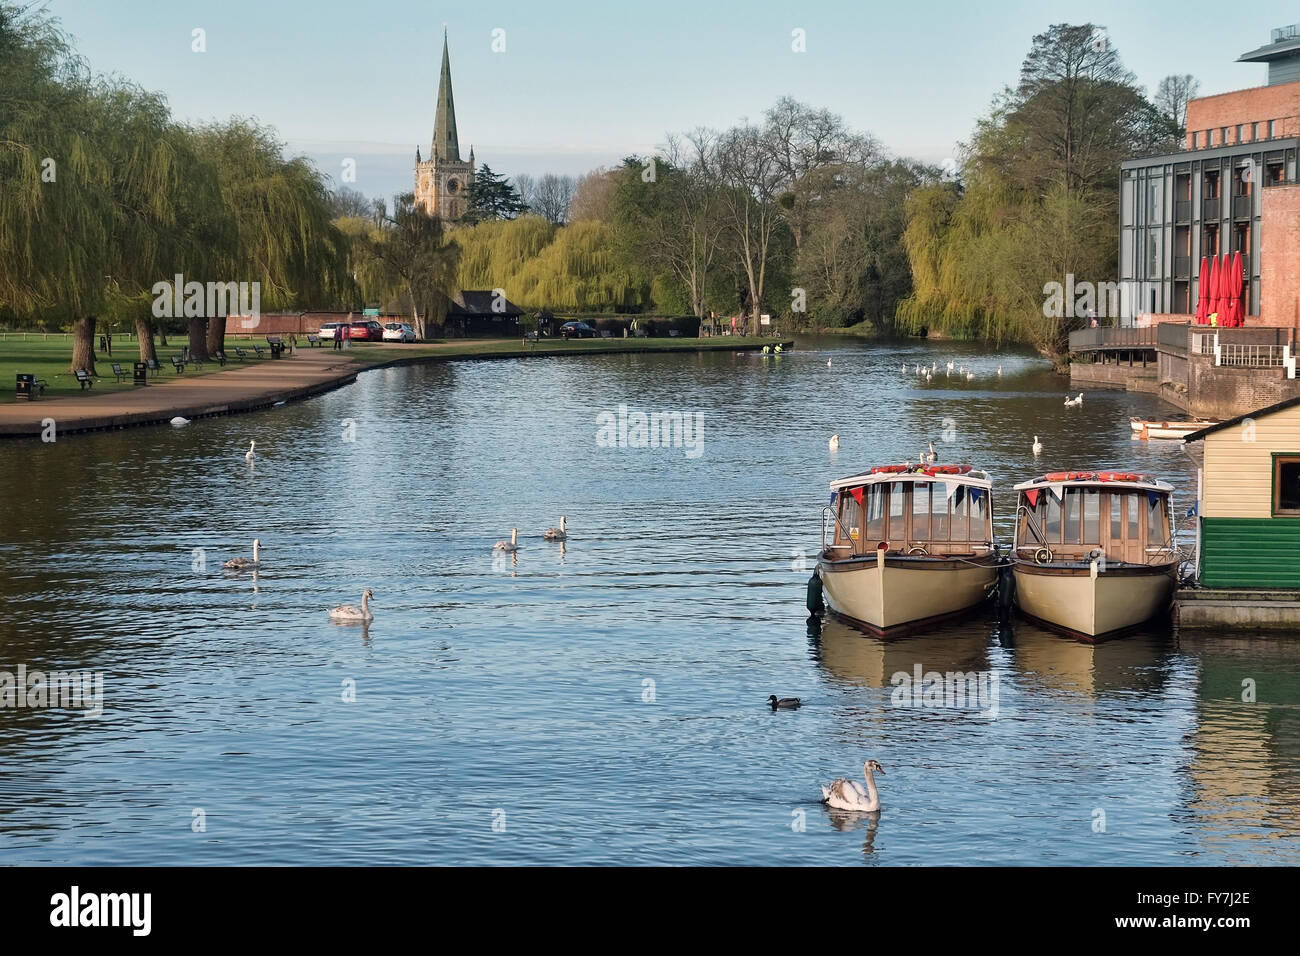 General view of the River Avon, the RSC  theatre and Holy Trinity Church at Stratford-upon-Avon, Warwickshire, England, UK. Stock Photo